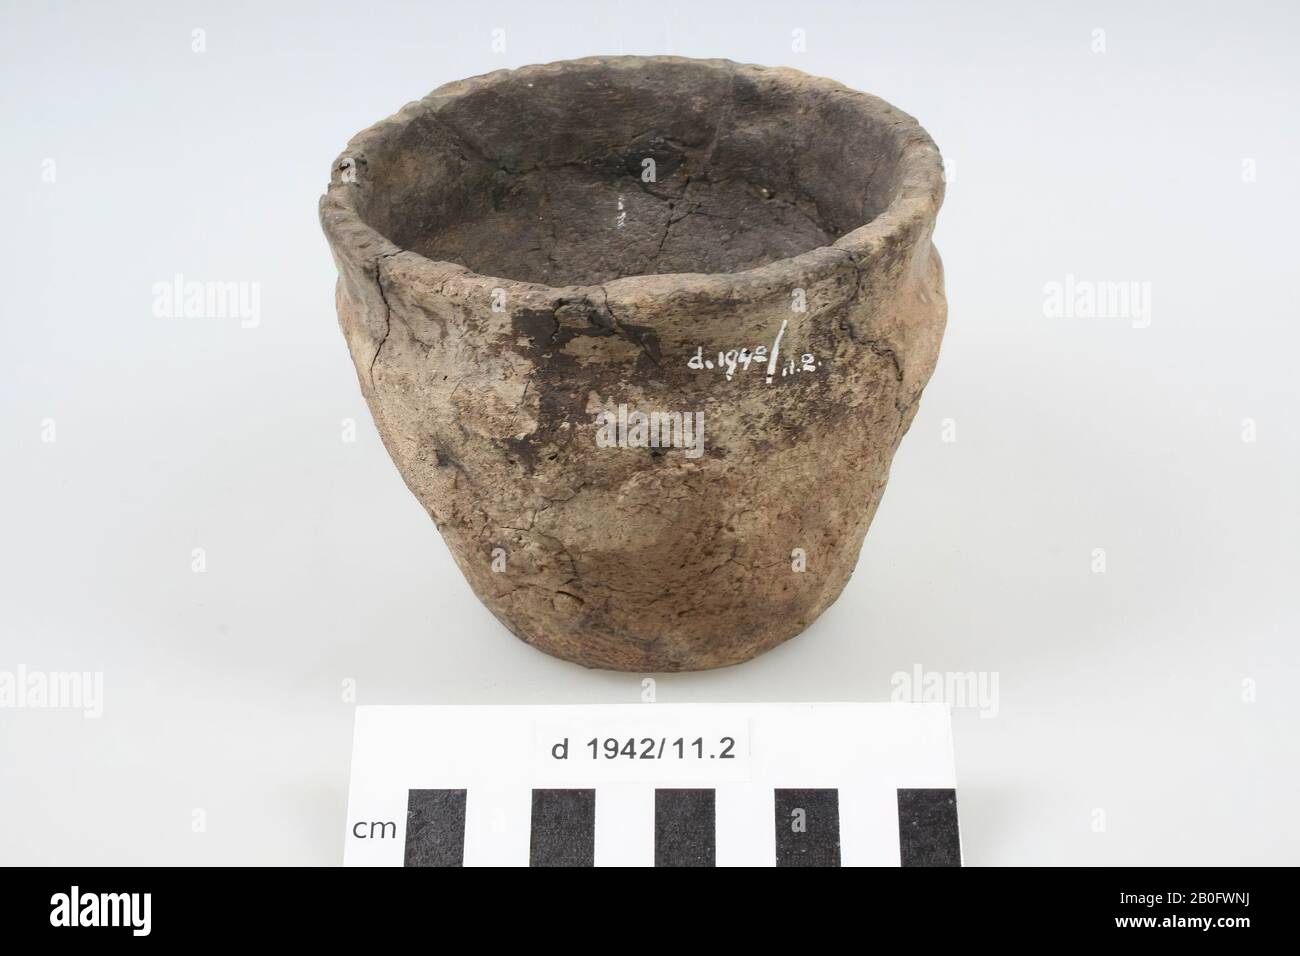 Jar of pottery. Old bonding and small addition, some cracks from the edge, chip off the edge. Contains cremated residues., Pot, earthenware, h: 9.1 cm, diam: 11.3 cm, prehistory, The Netherlands, Gelderland, Winterswijk, Ratum Stock Photo